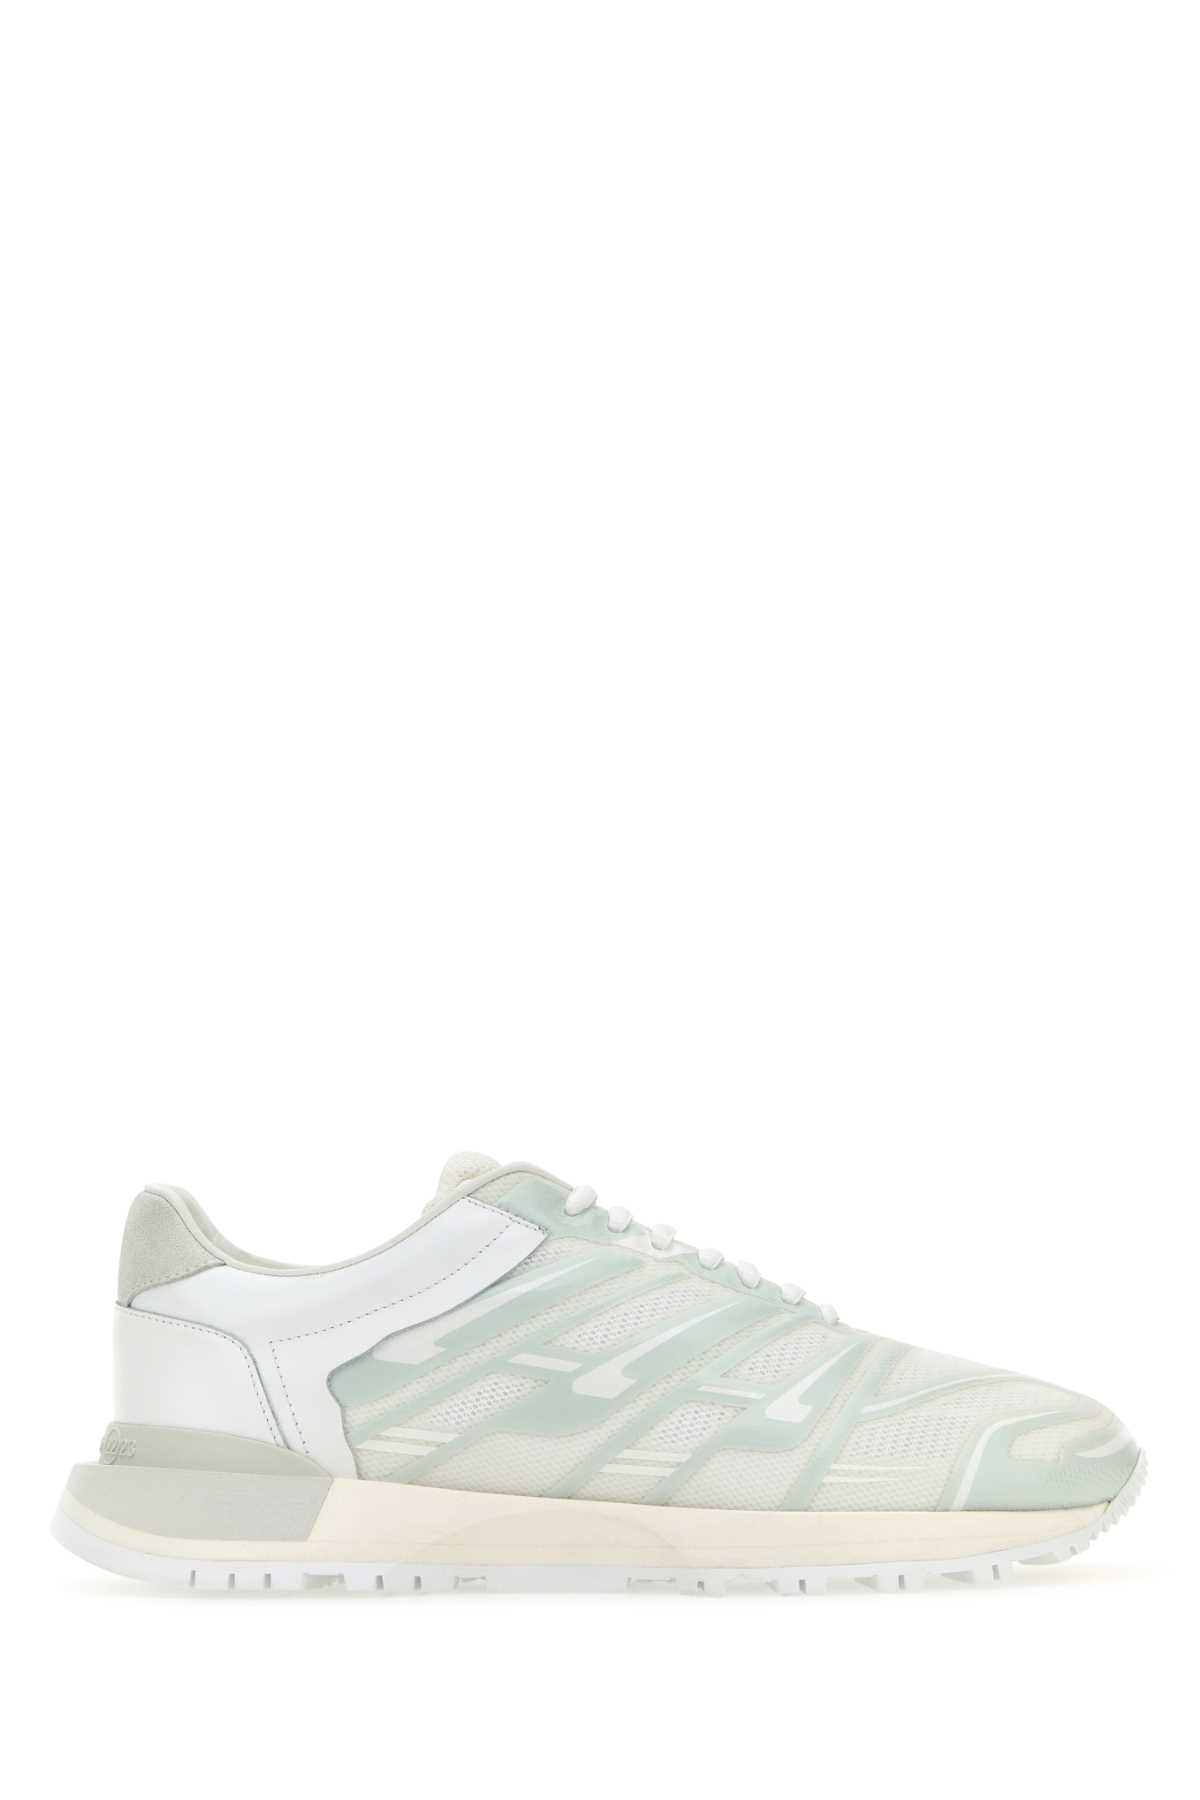 Maison Margiela White Mesh And Rubber Sneakers In Whitemix